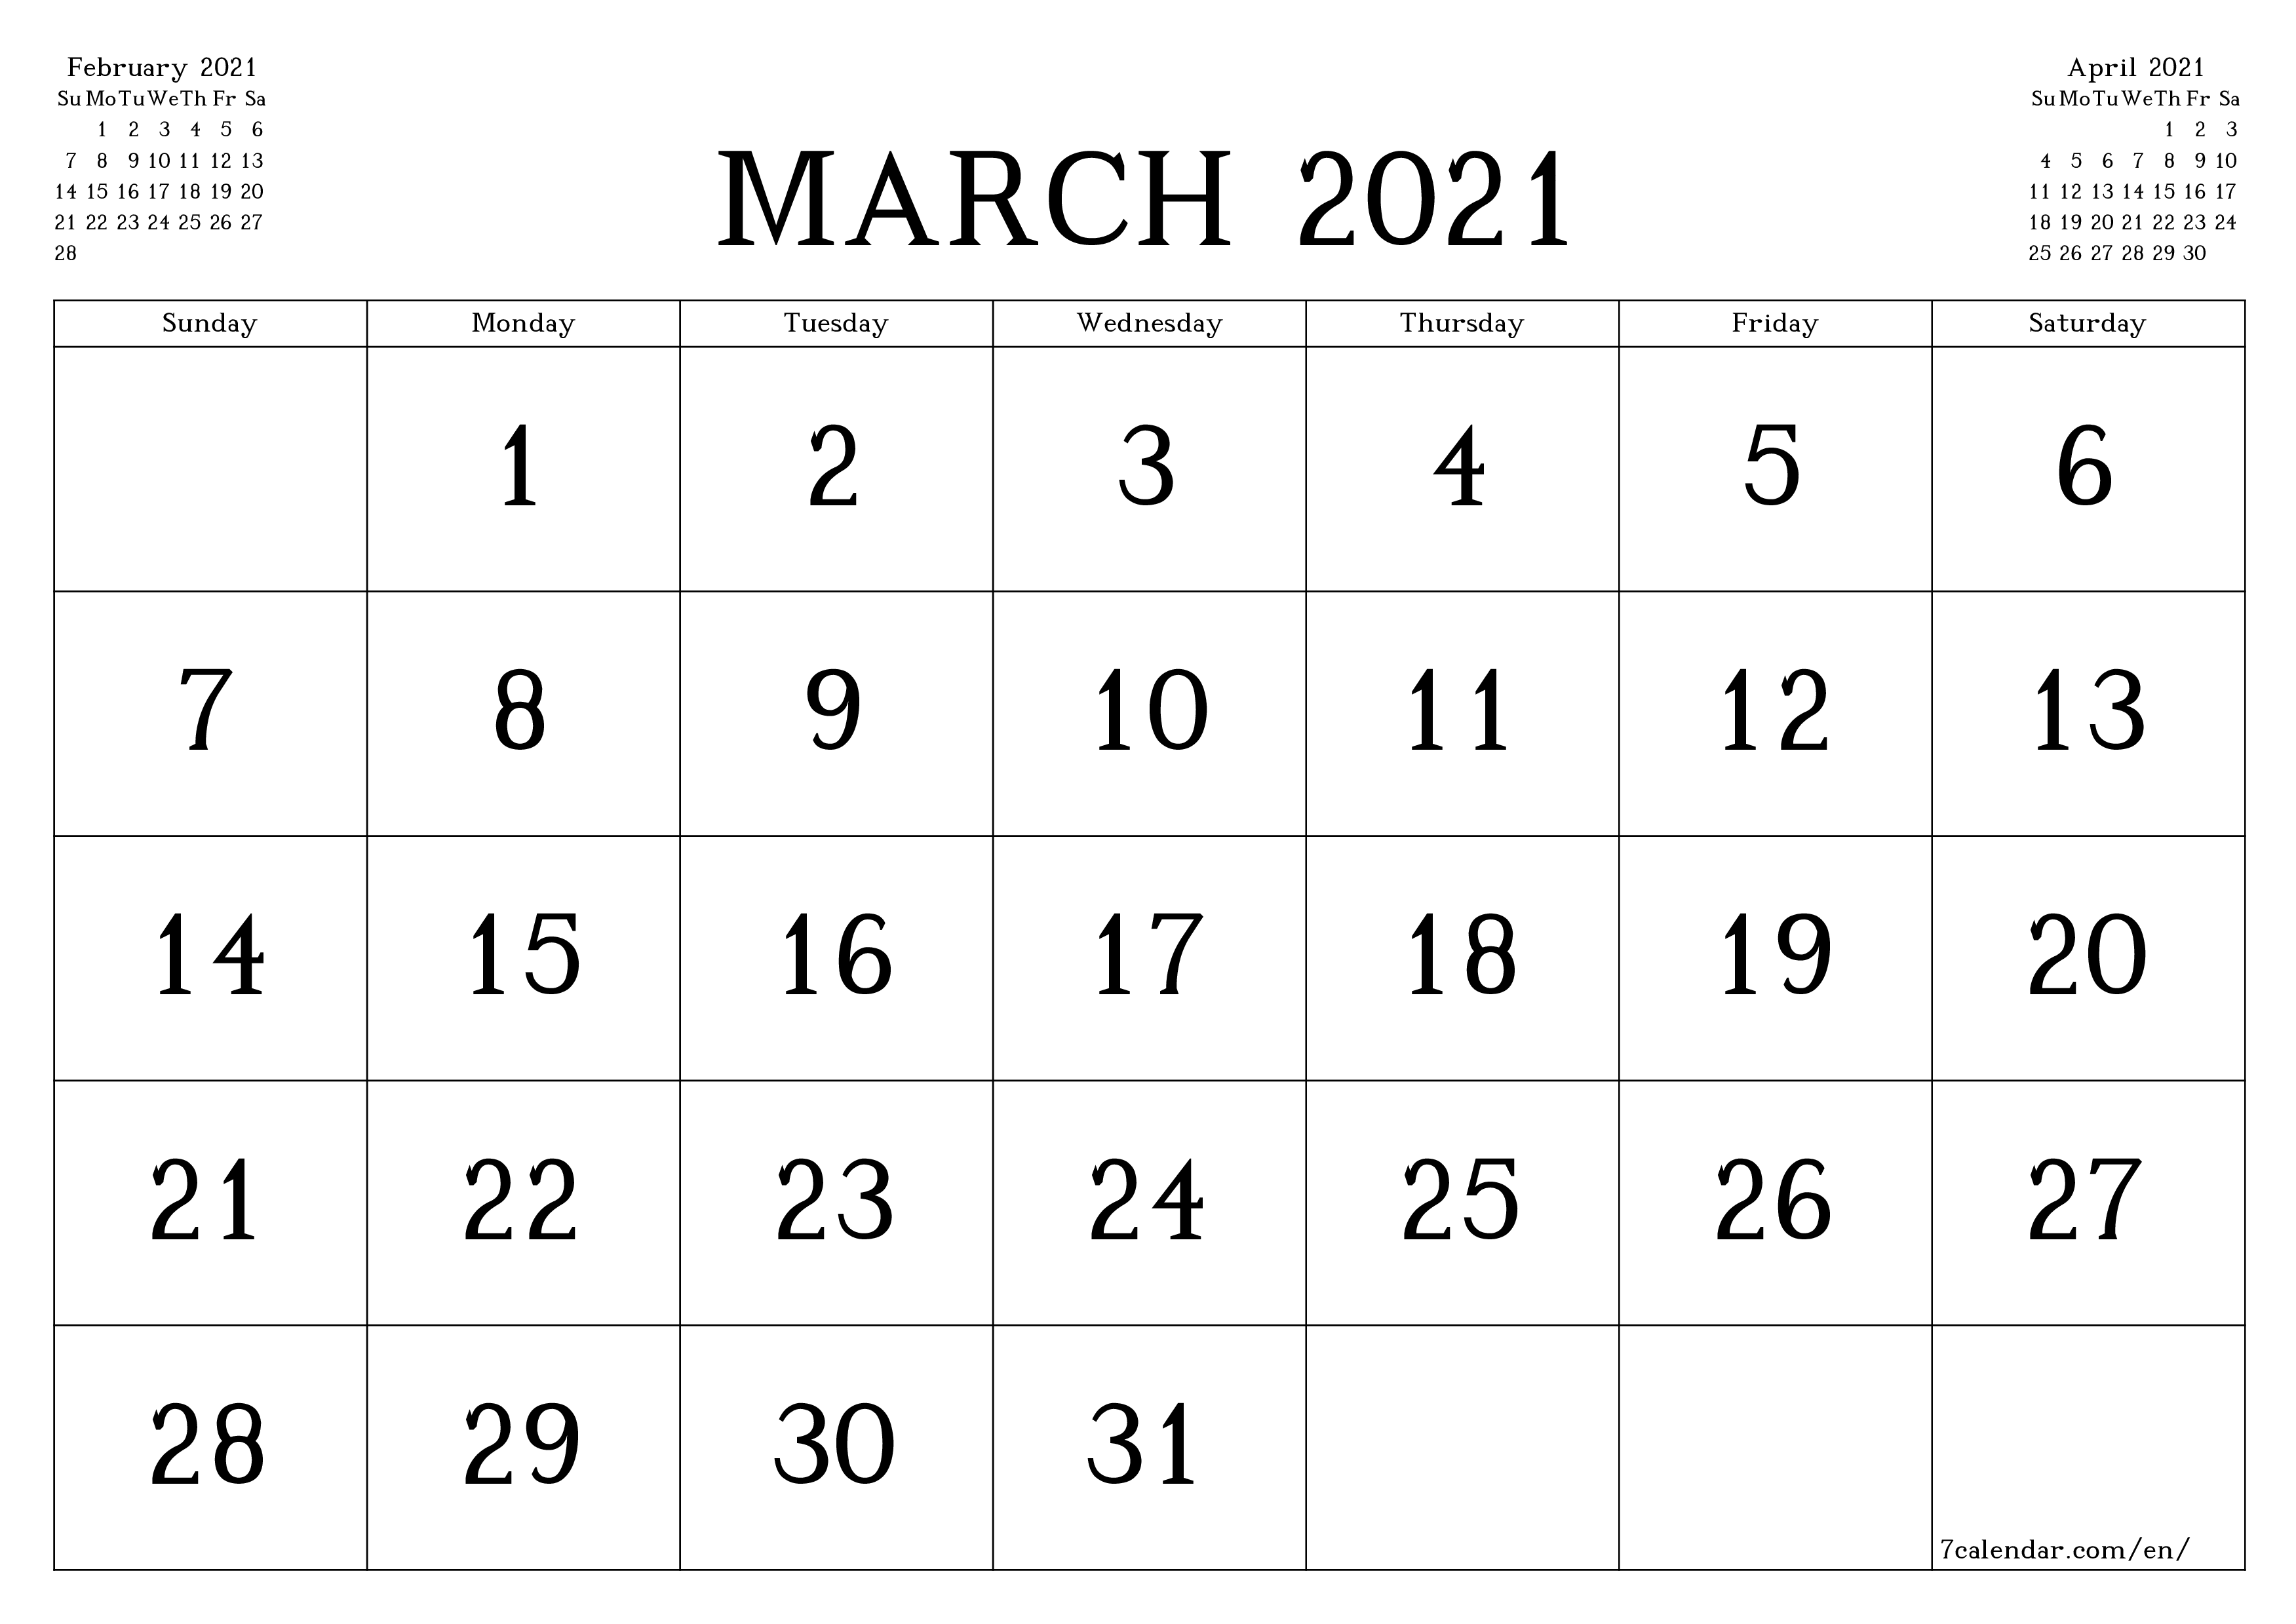 Blank monthly dated HD template image of calendar for month March 2021 save and print to PDF PNG English - 7calendar.com